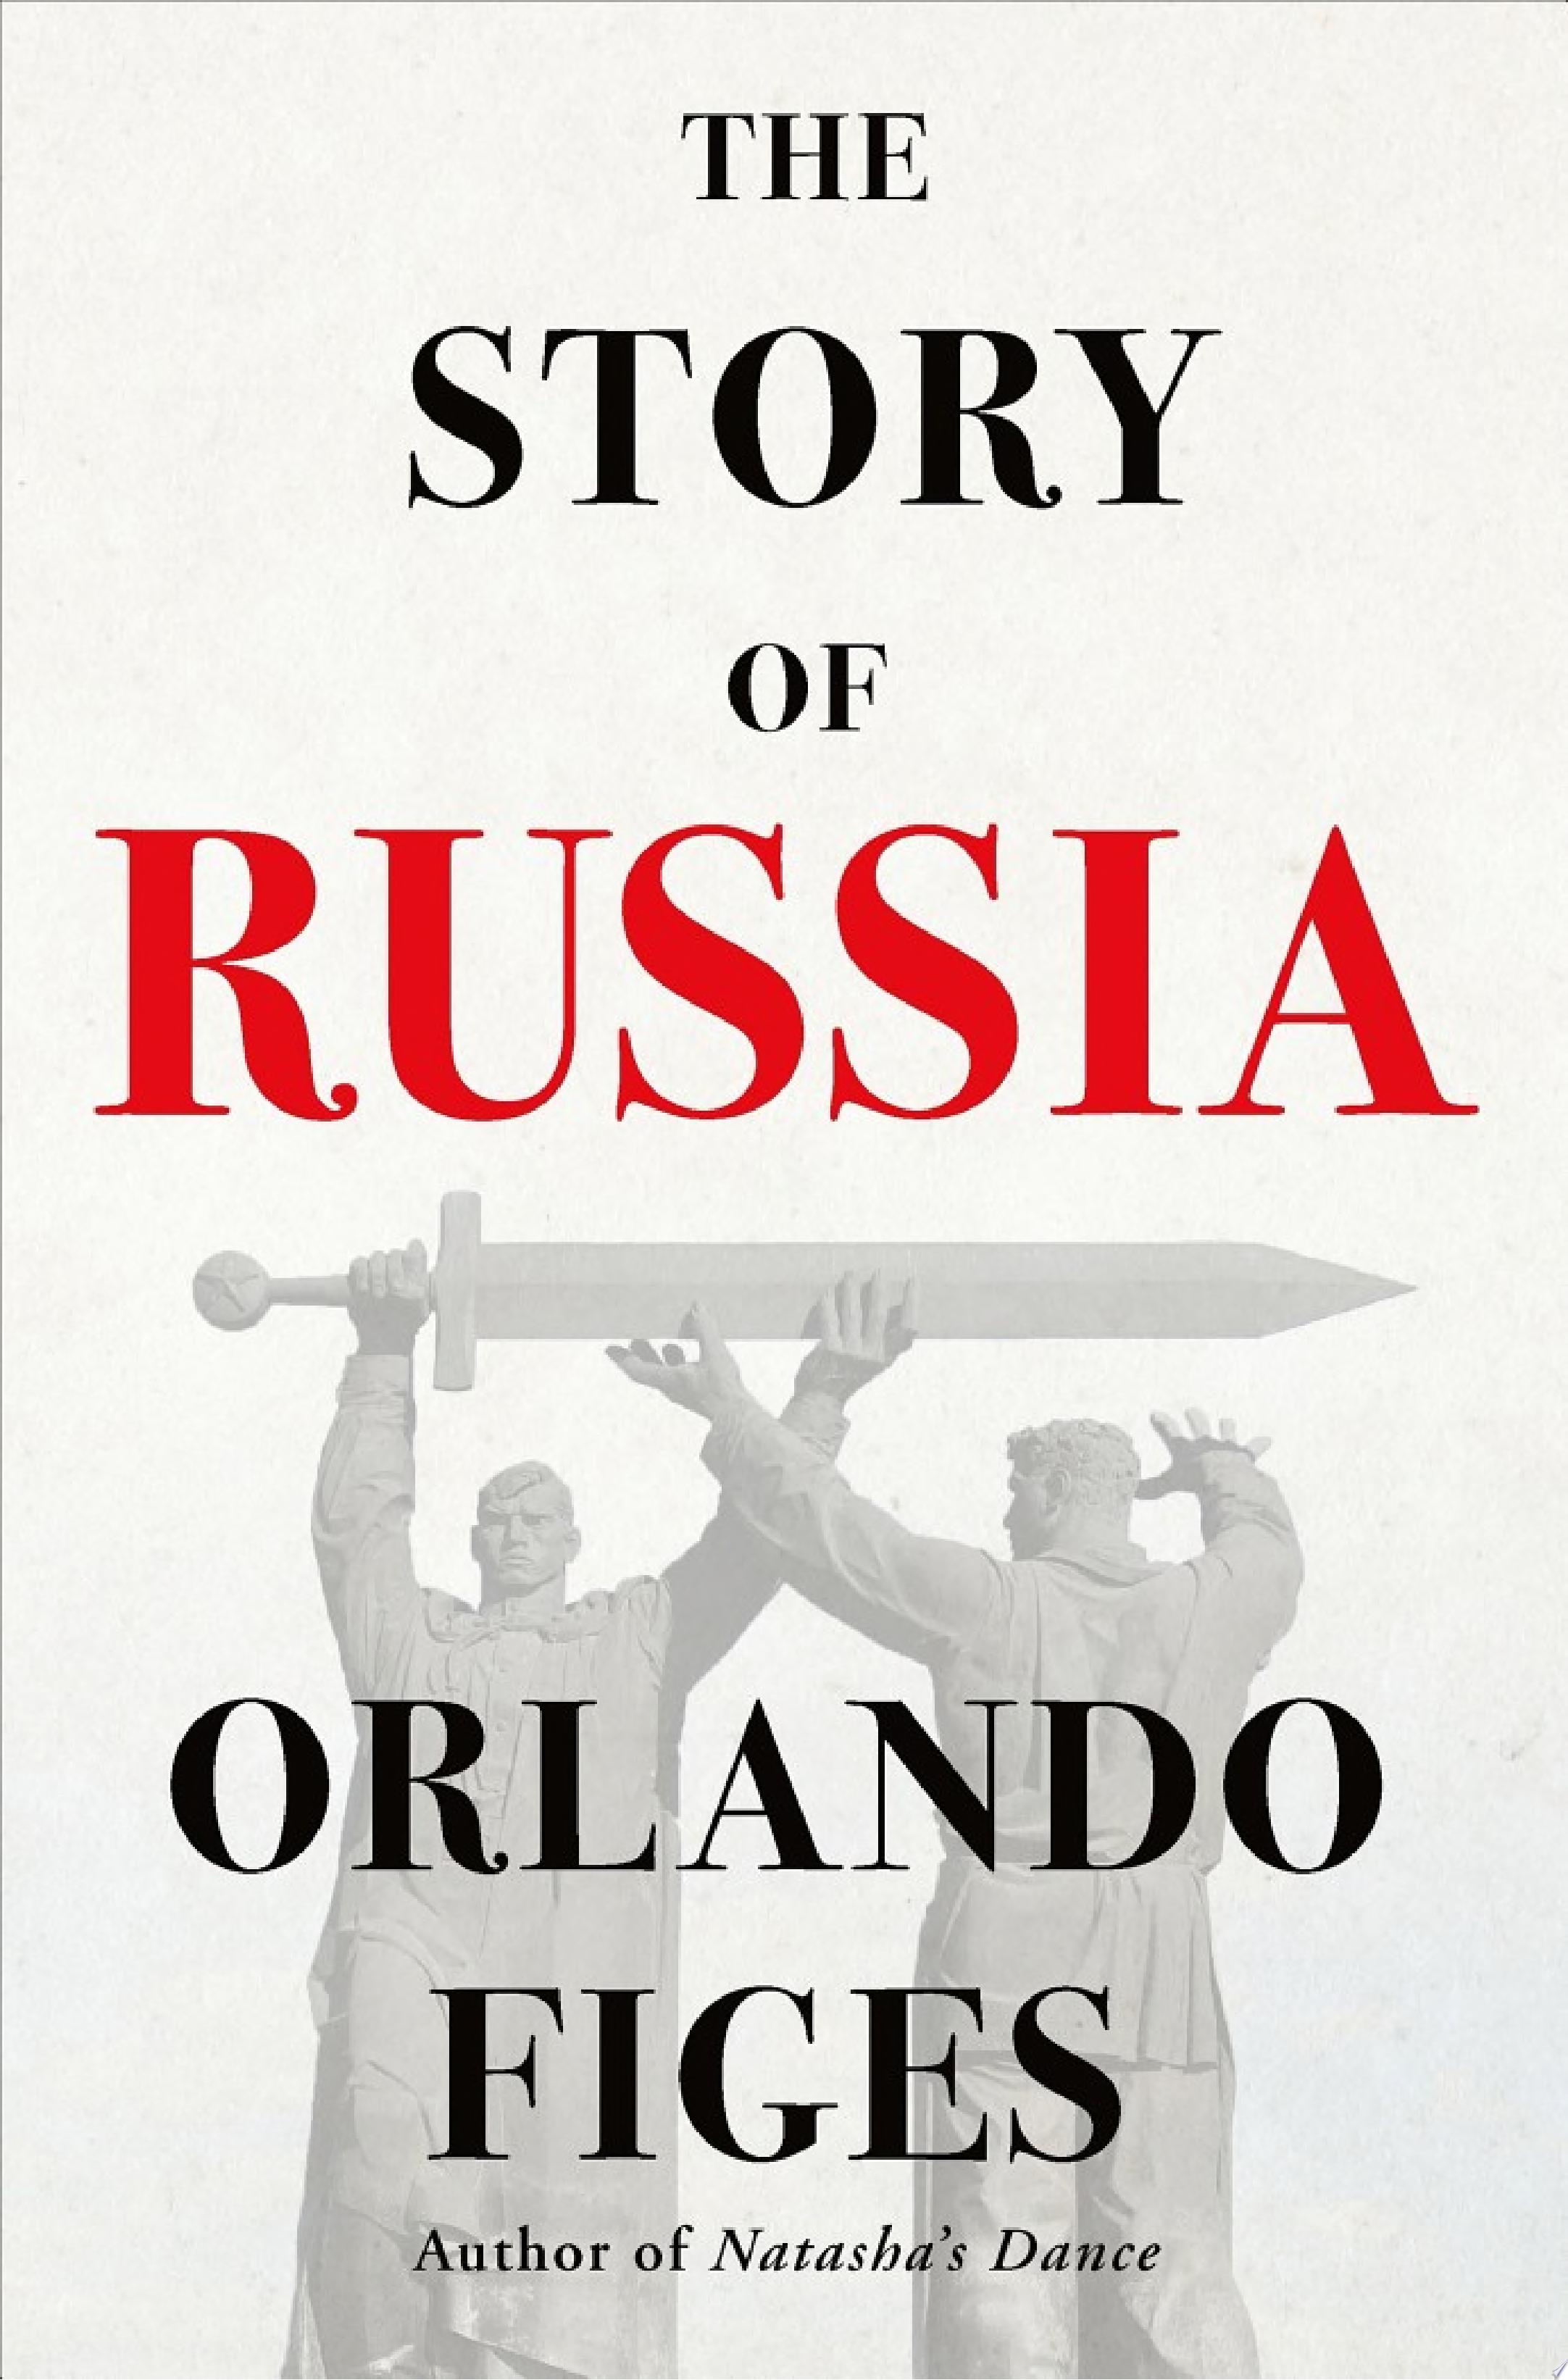 Image for "The Story of Russia"